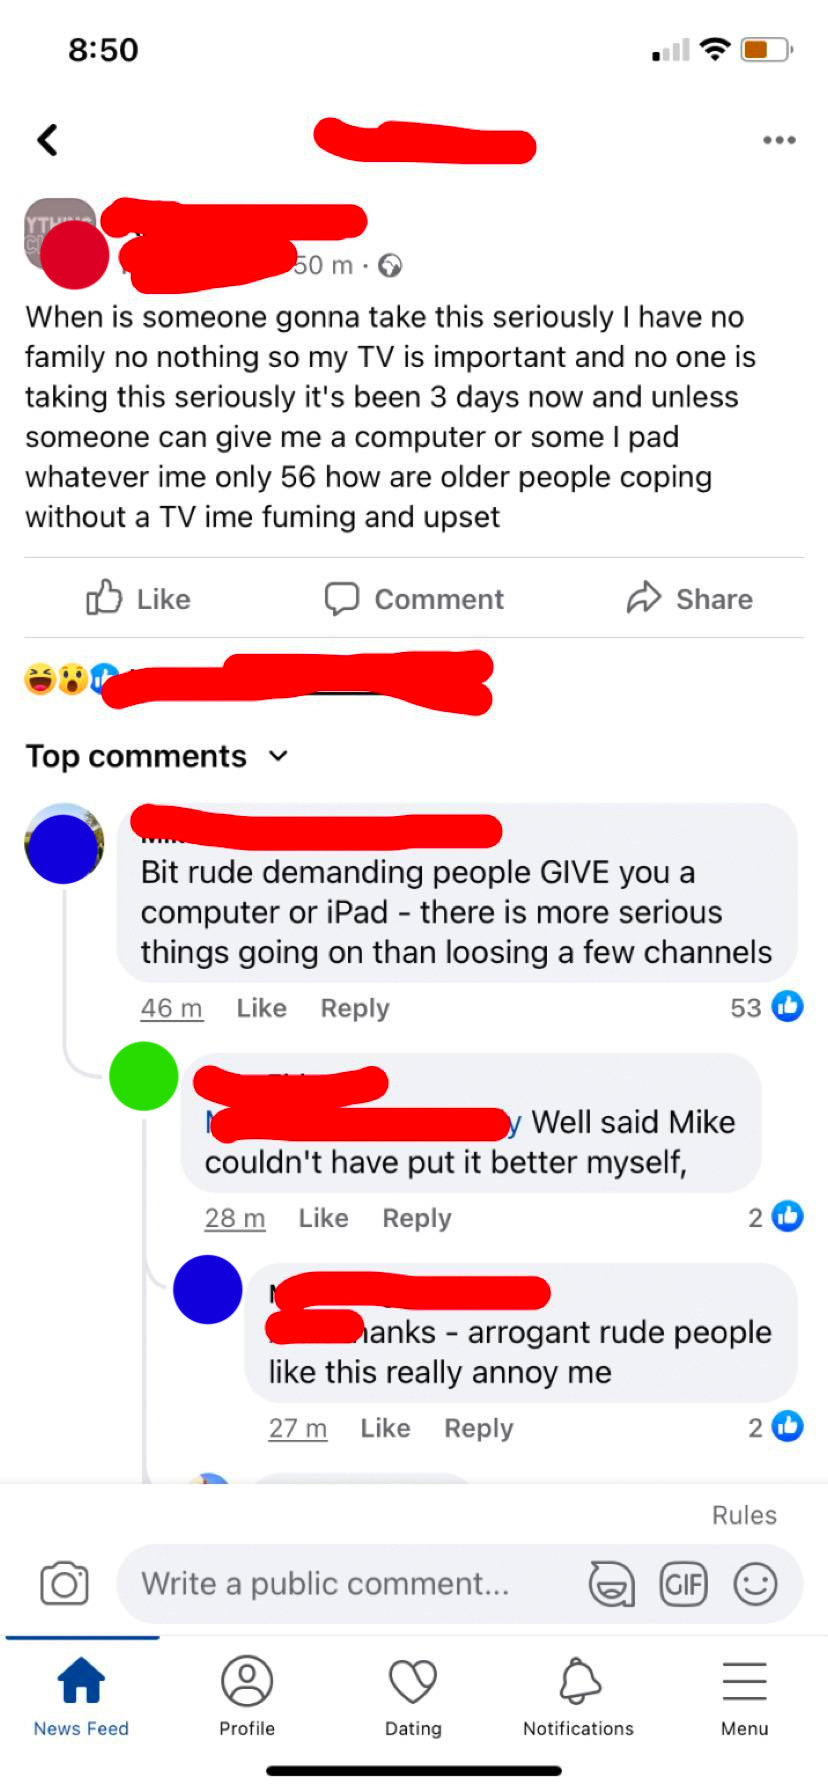 Comment thread on Facebook ending in, &quot;Thanks - arrogant rude people like this really annoy me&quot;